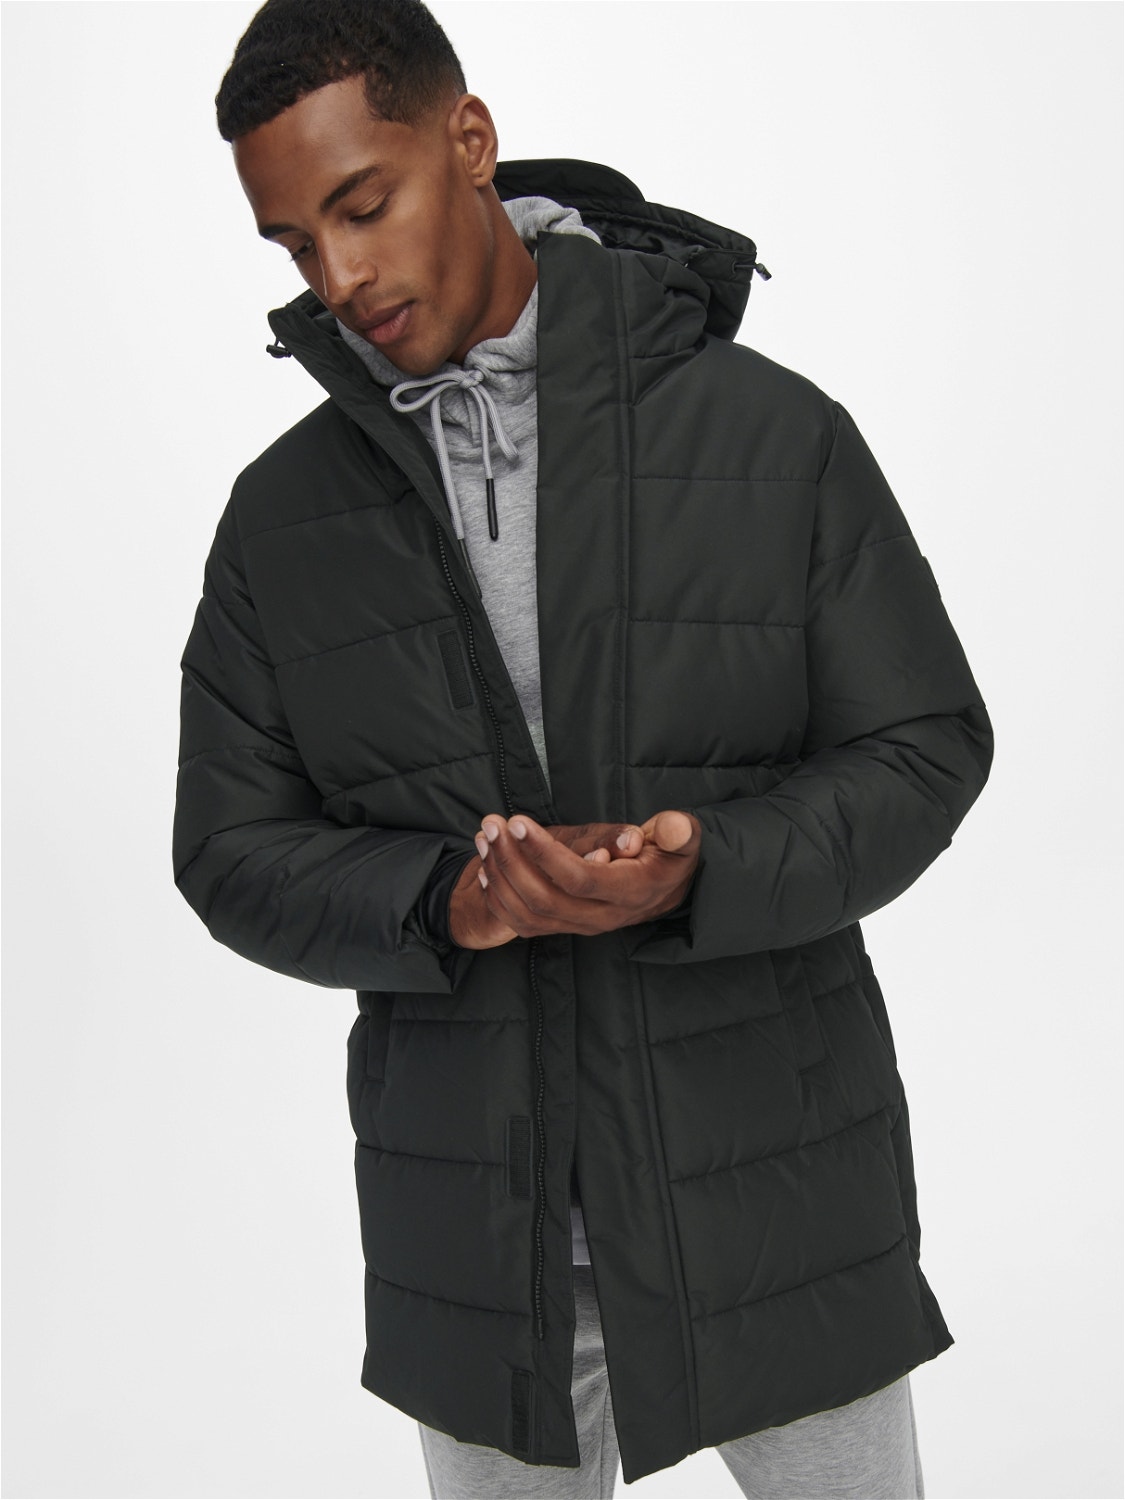 ONLY & SONS Jacket with detachable hood -Black - 22020156